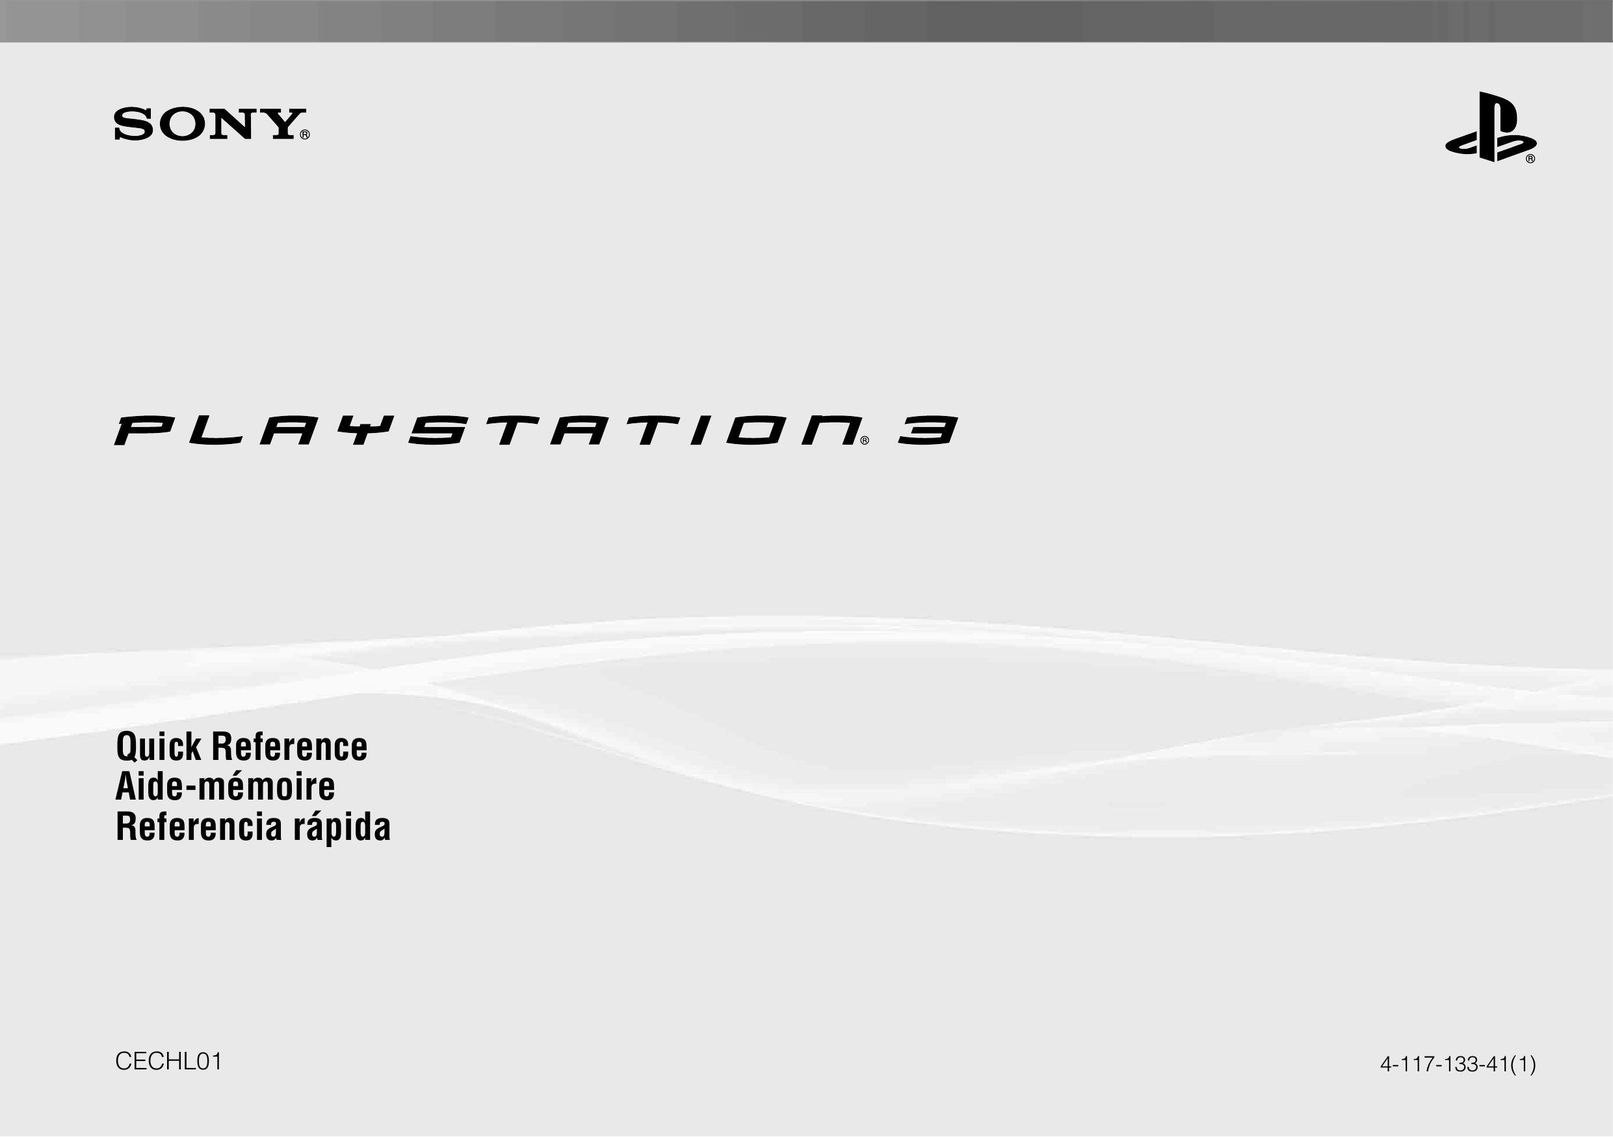 Sony 4-117-133-41 Video Game Console User Manual